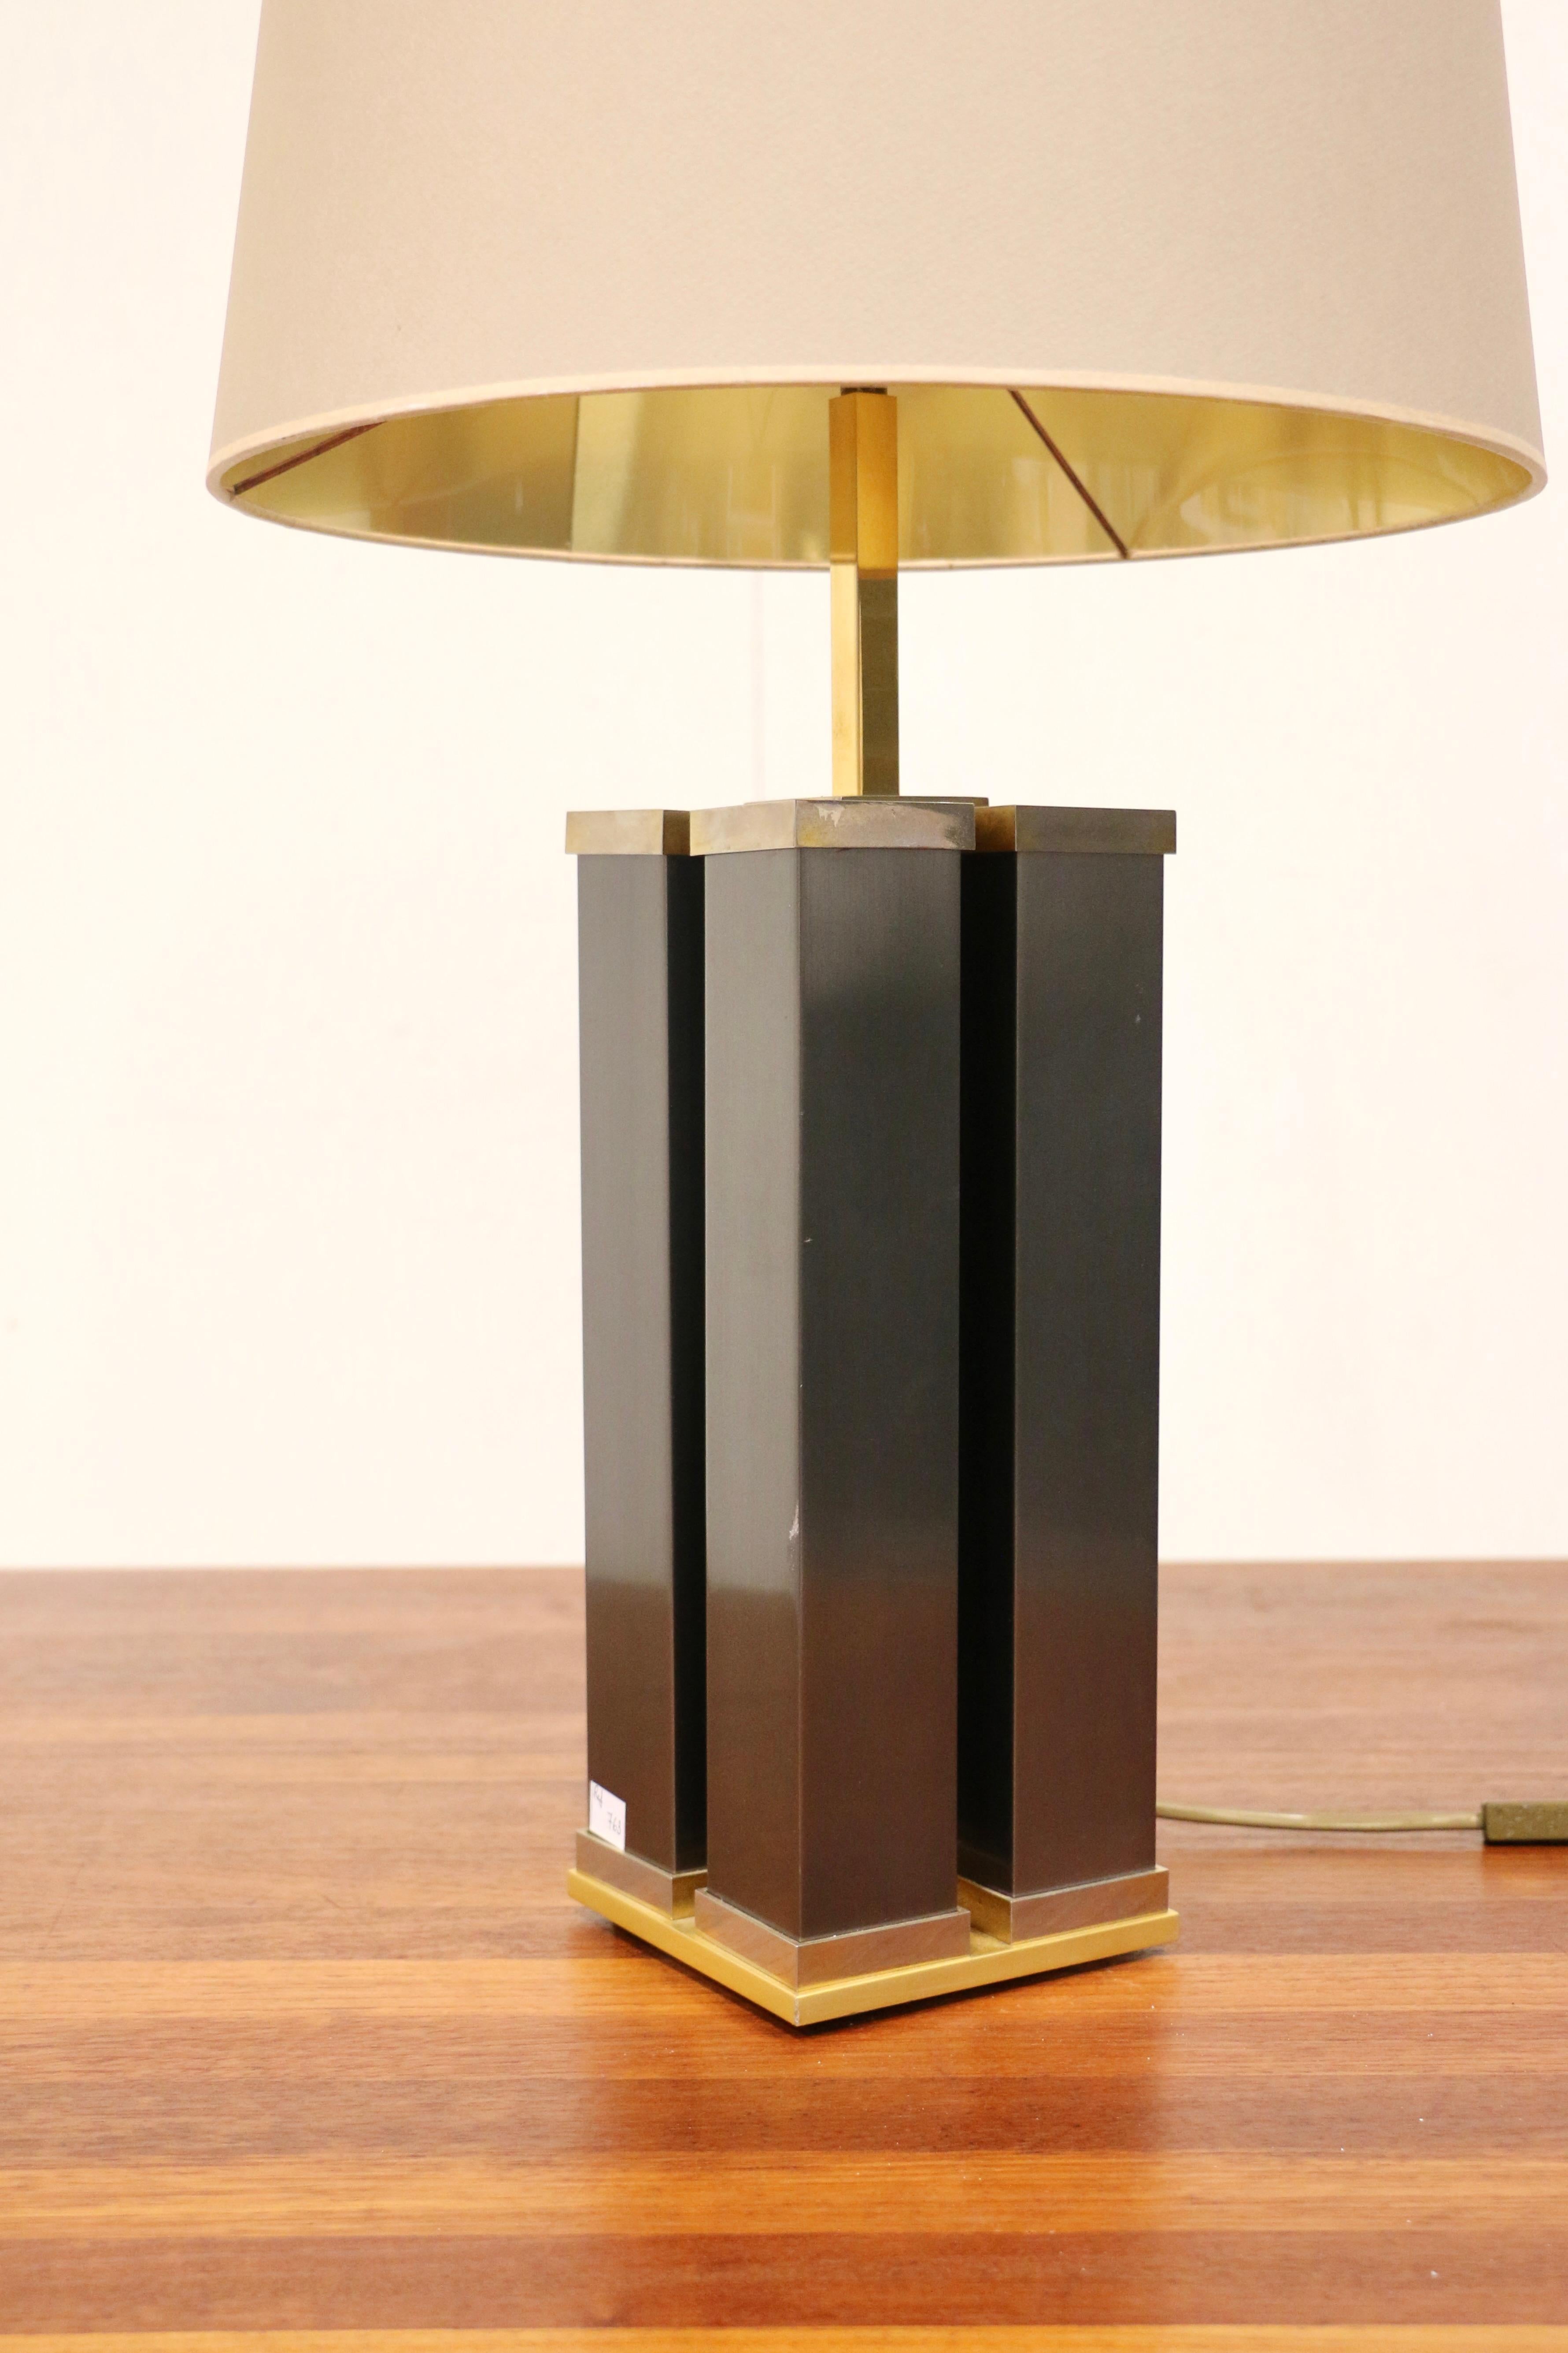 A large lamp with a square base in brass and brushed stainless steel.